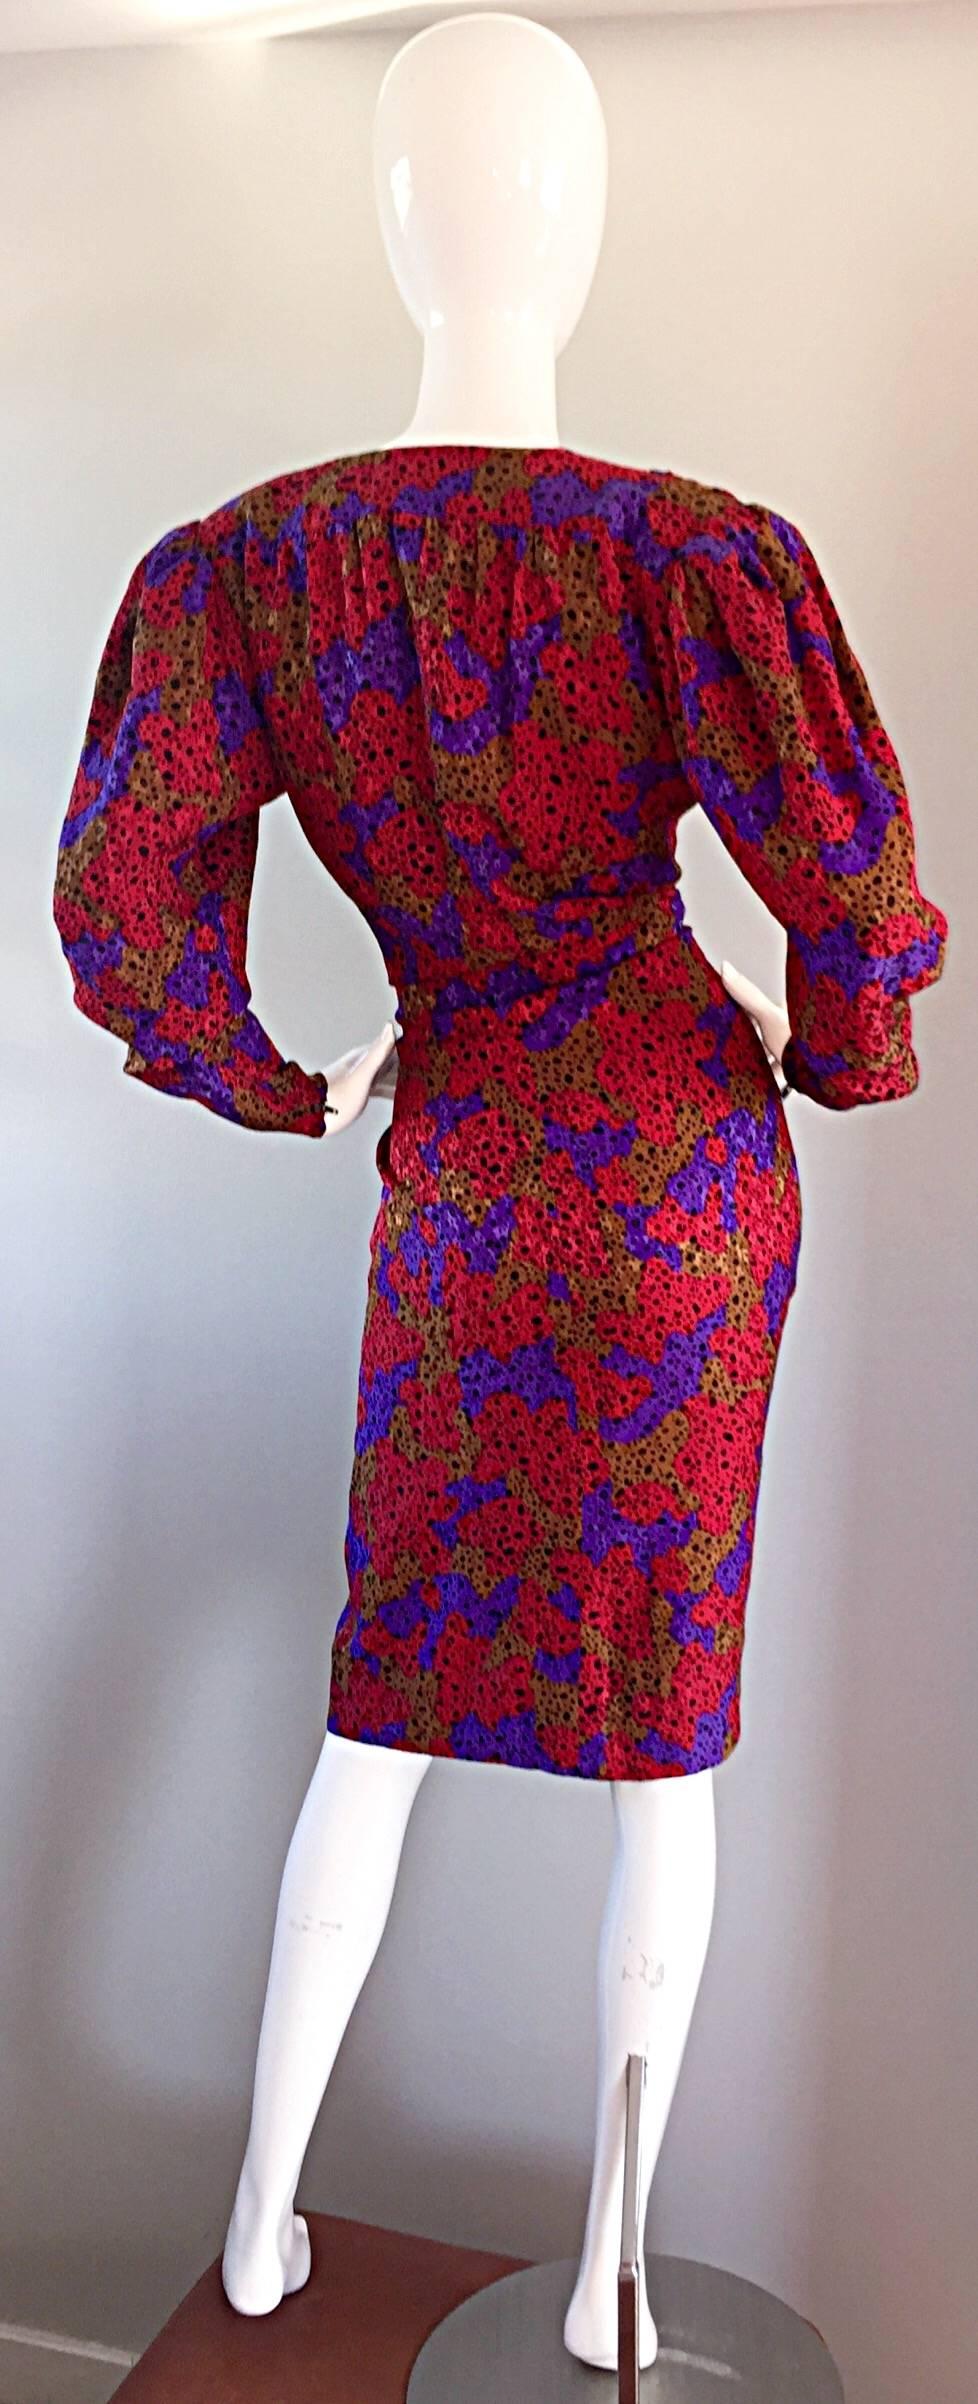 incredible vintage Yves Saint Laurent "Rive Gauche" silk dress. Leopard / cheetah print in signature YSL vivid colors of red, purple, tan and black. Oozes just the right amount of sex appeal with a plunging bust.Wraps around through the